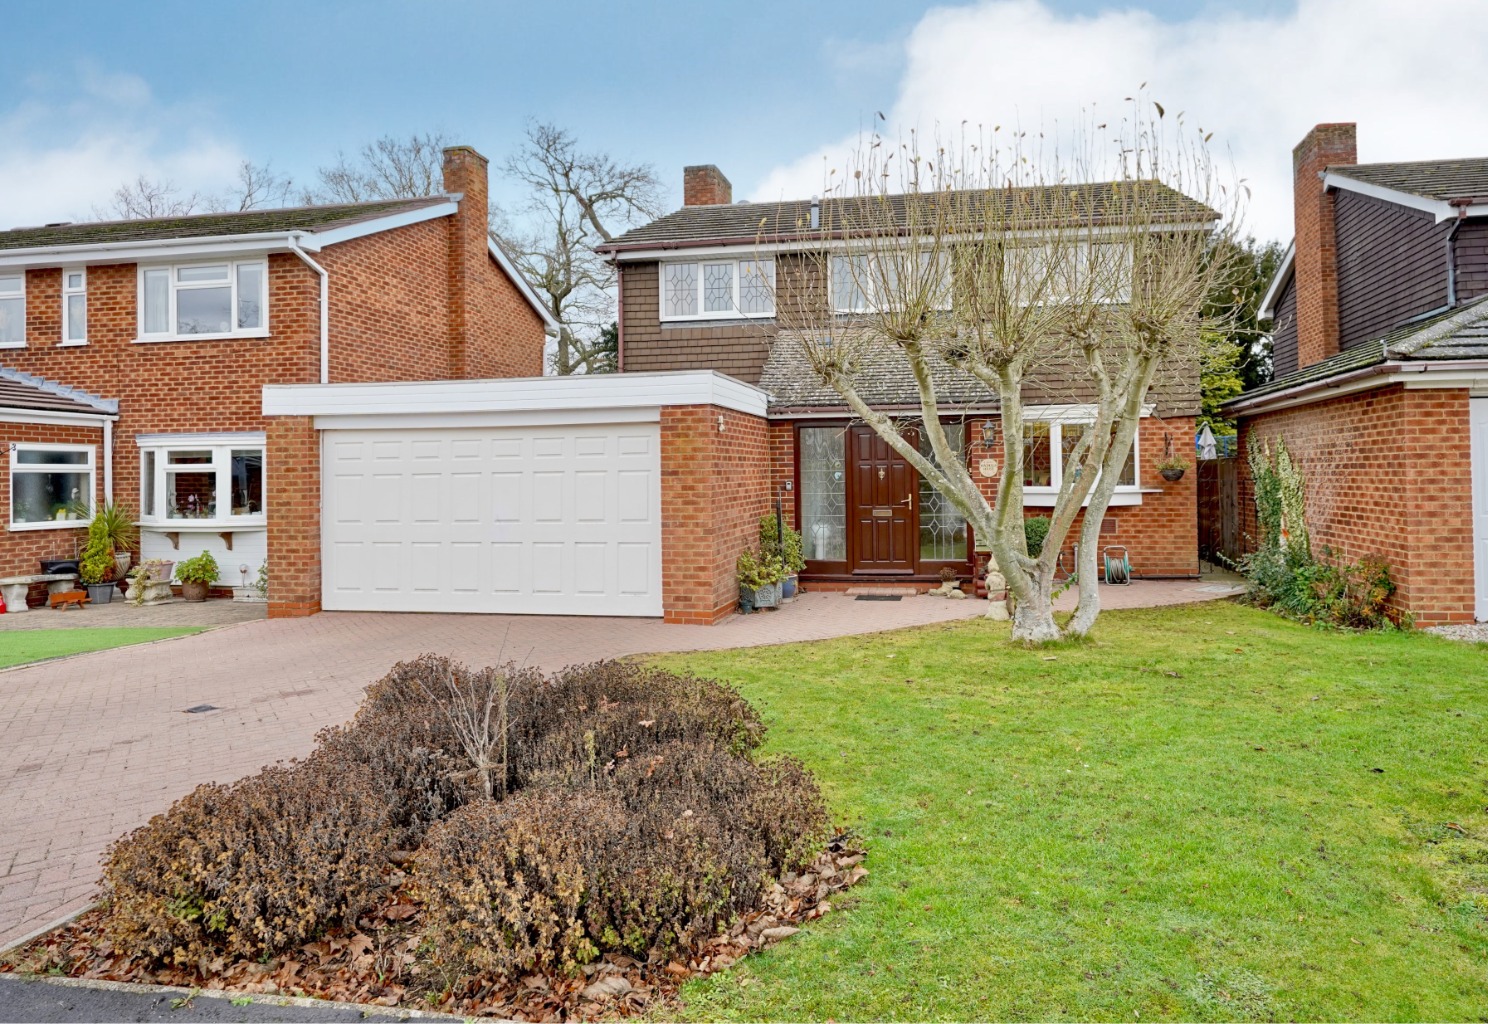 We are pleased to offer this spacious family home set in a quiet cul-de-sac in a popular area of St Neots. The property is close to St Neots train station, priory park and local secondary school. There is a double garage and driveway providing off road parking.